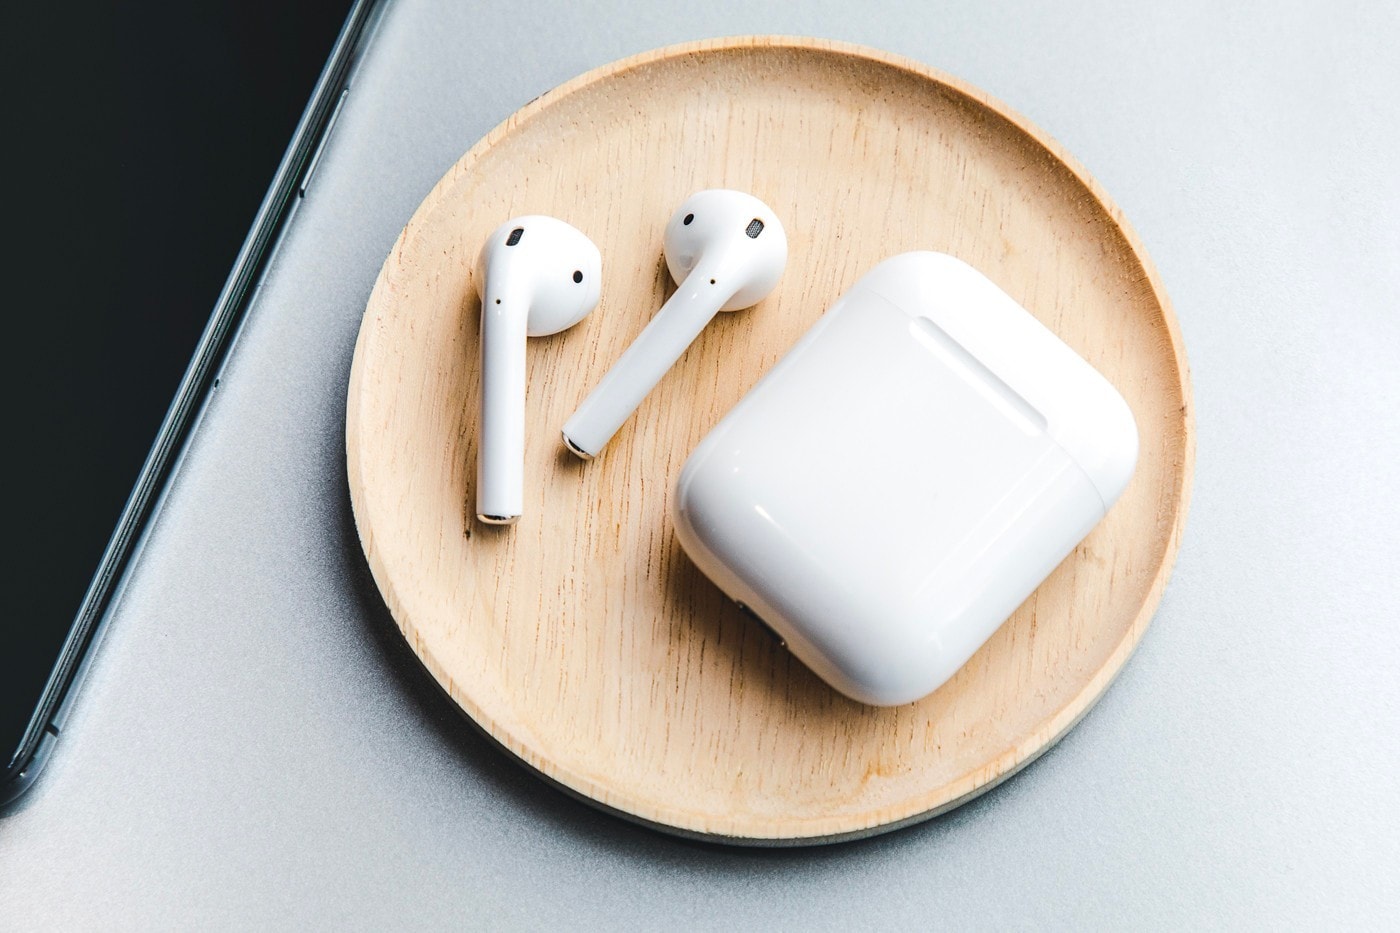 Apple AirPods Best Selling Earphones Headphones Market Bestsellers True Wireless Earbuds Counterpoint Research 60 Per Cent Share Q4 2018 12500000 Pairs Shipped Globally Dominating Industry Tech News Sales Updates 